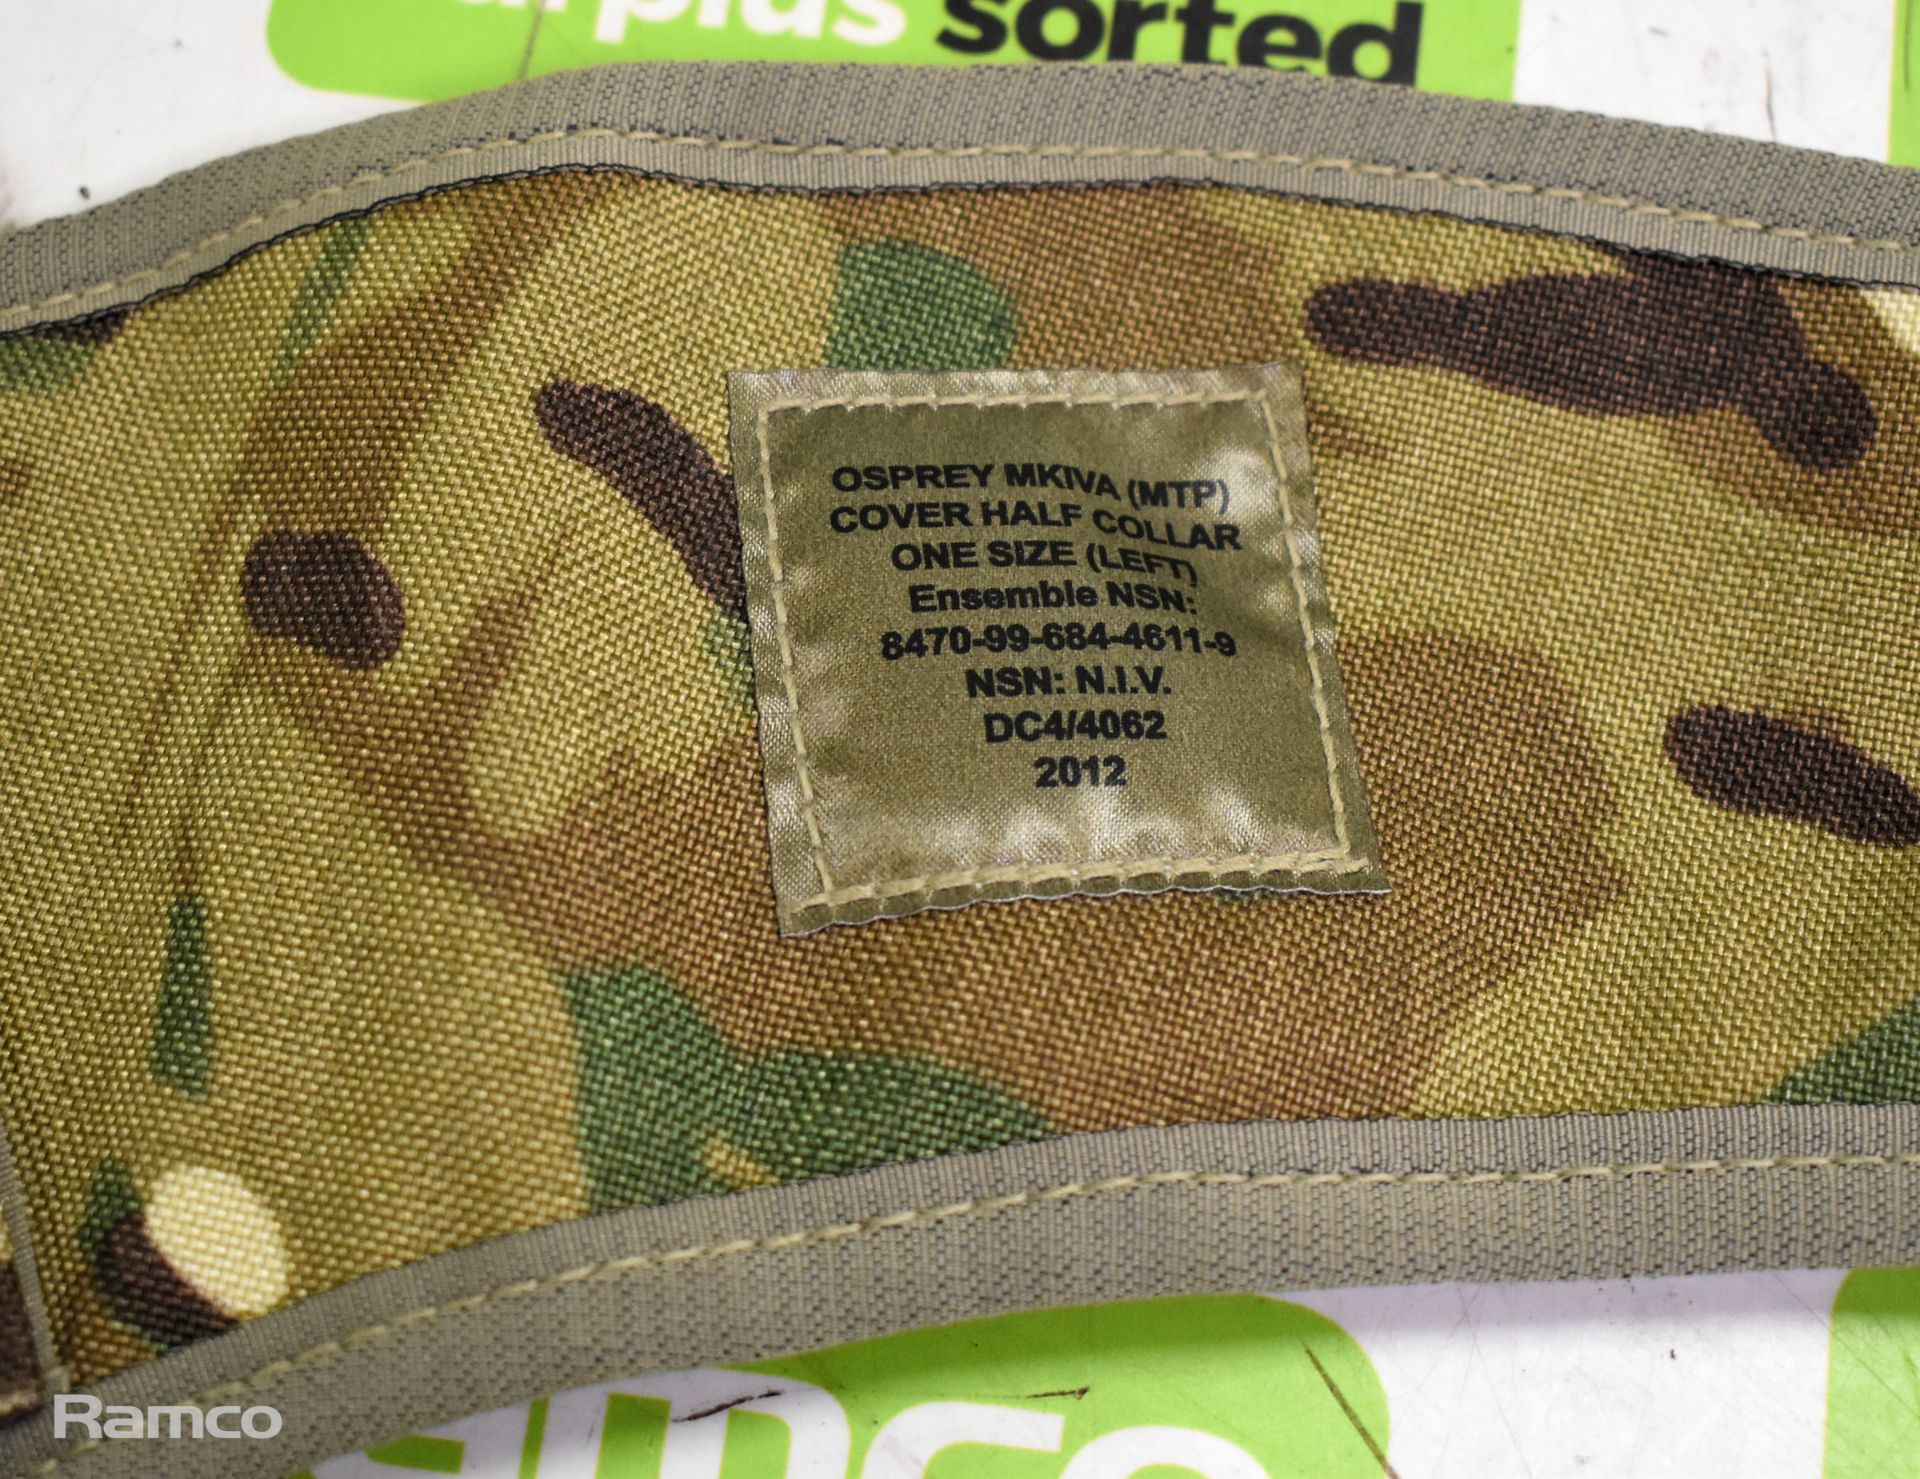 50x British Army MTP Osprey MK IVA half collar covers - mixed grades and sizes - Image 2 of 5